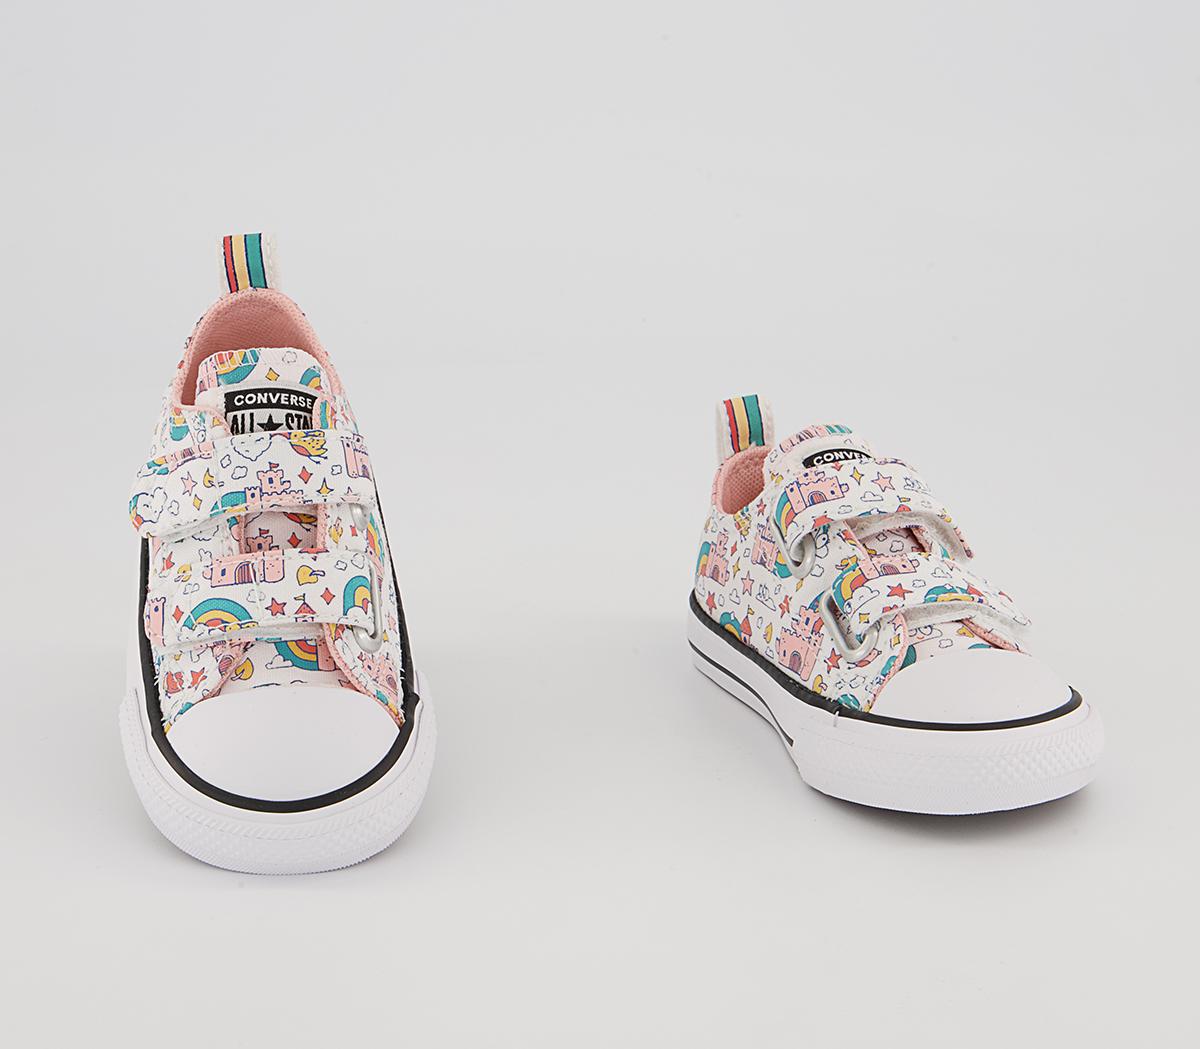 Converse All Star 2vlace Trainers White Pink Teal Rainbow Castles - Unisex